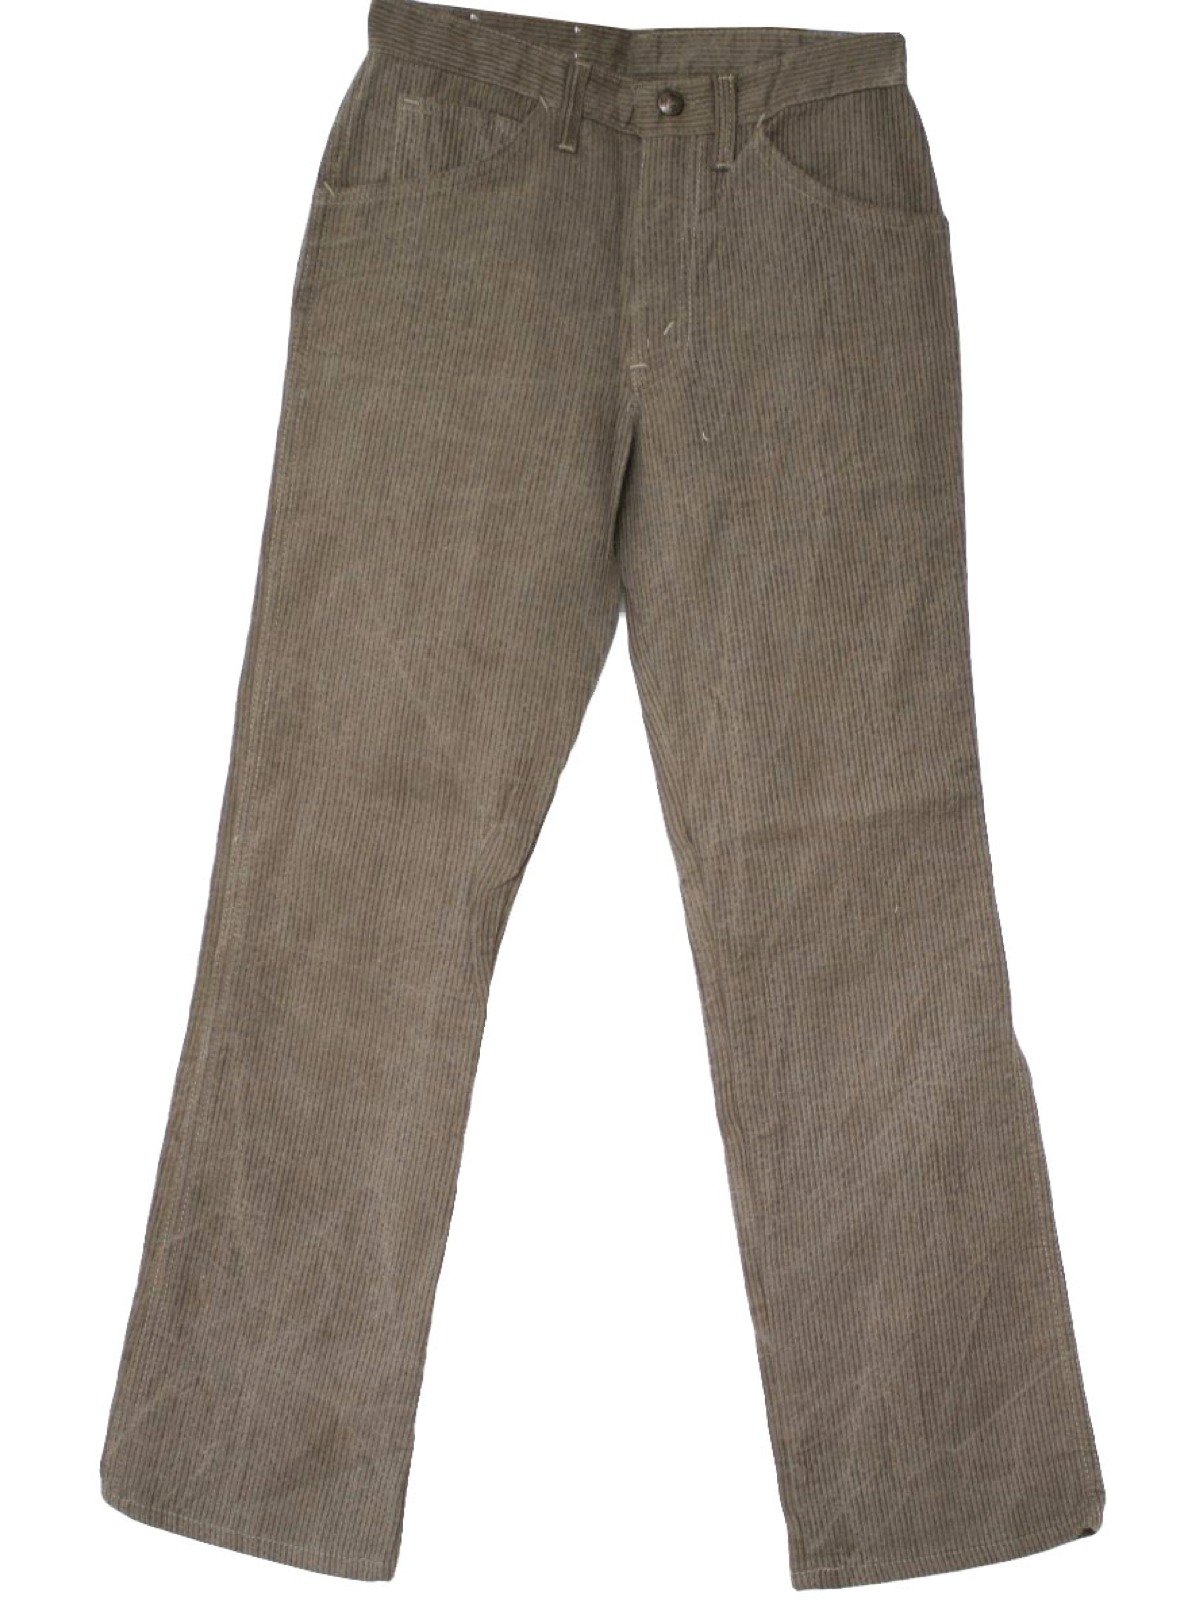 Vintage 70s Flared Pants / Flares: 70s -Dee Cee- Mens New-Old brown and ...